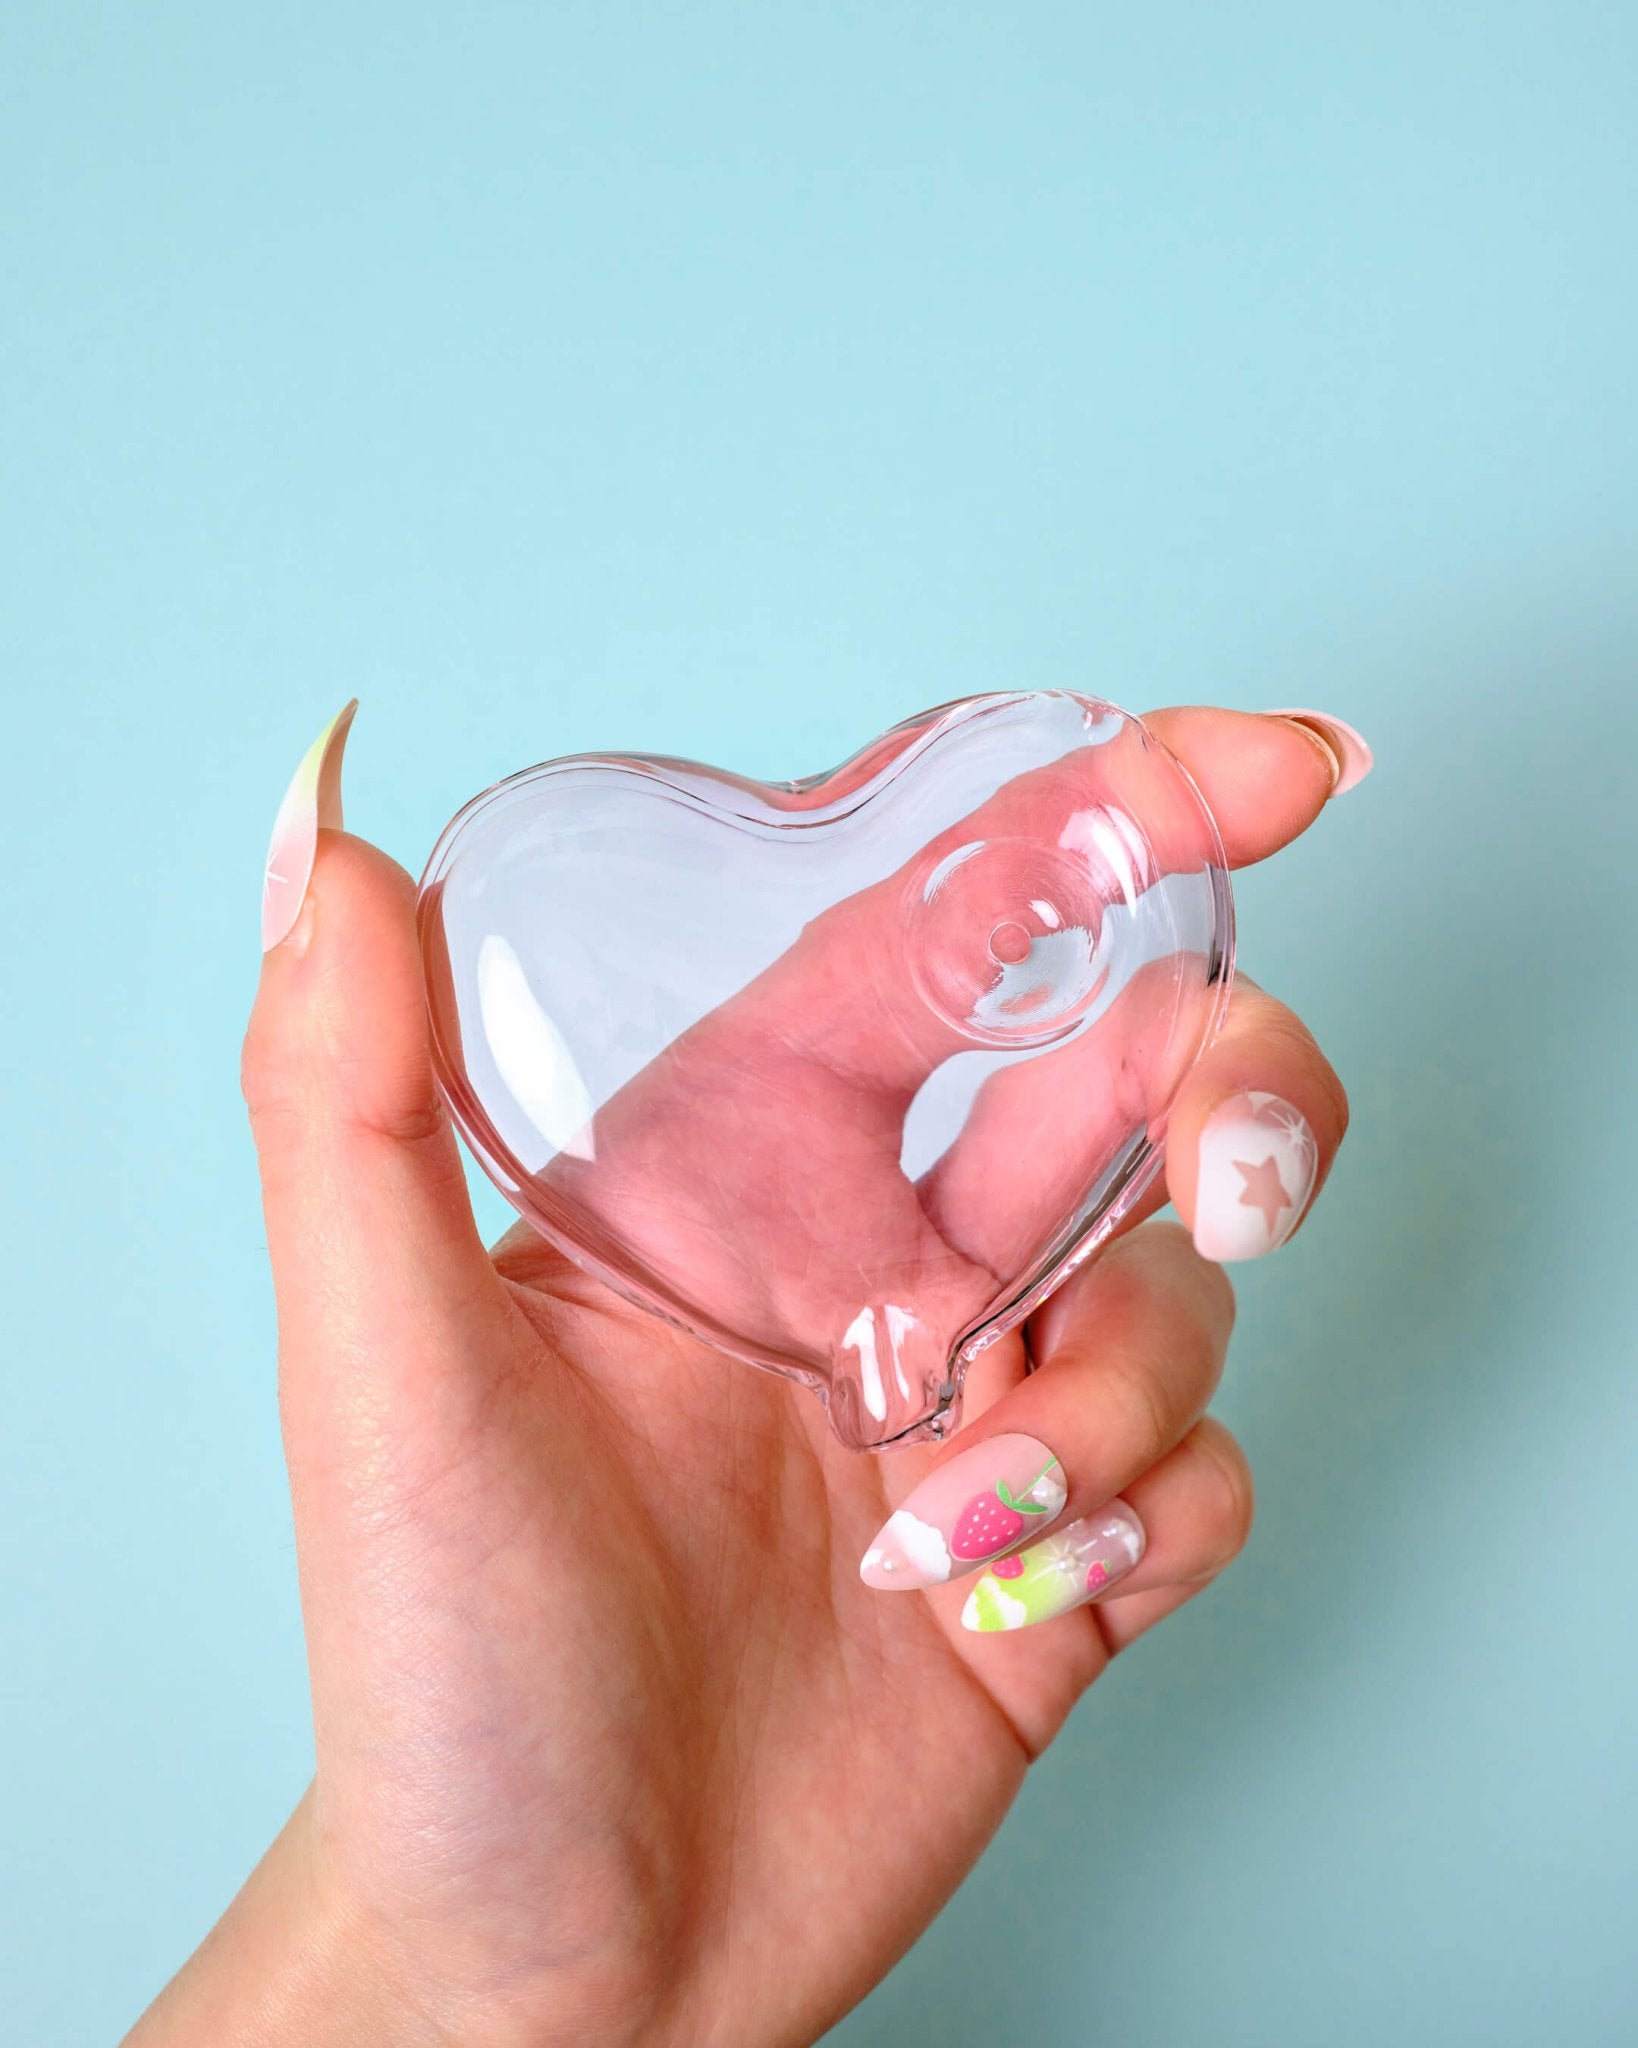 BUBBLE HEART PIPE - Summer Sunset - pink heart shape glass pipe